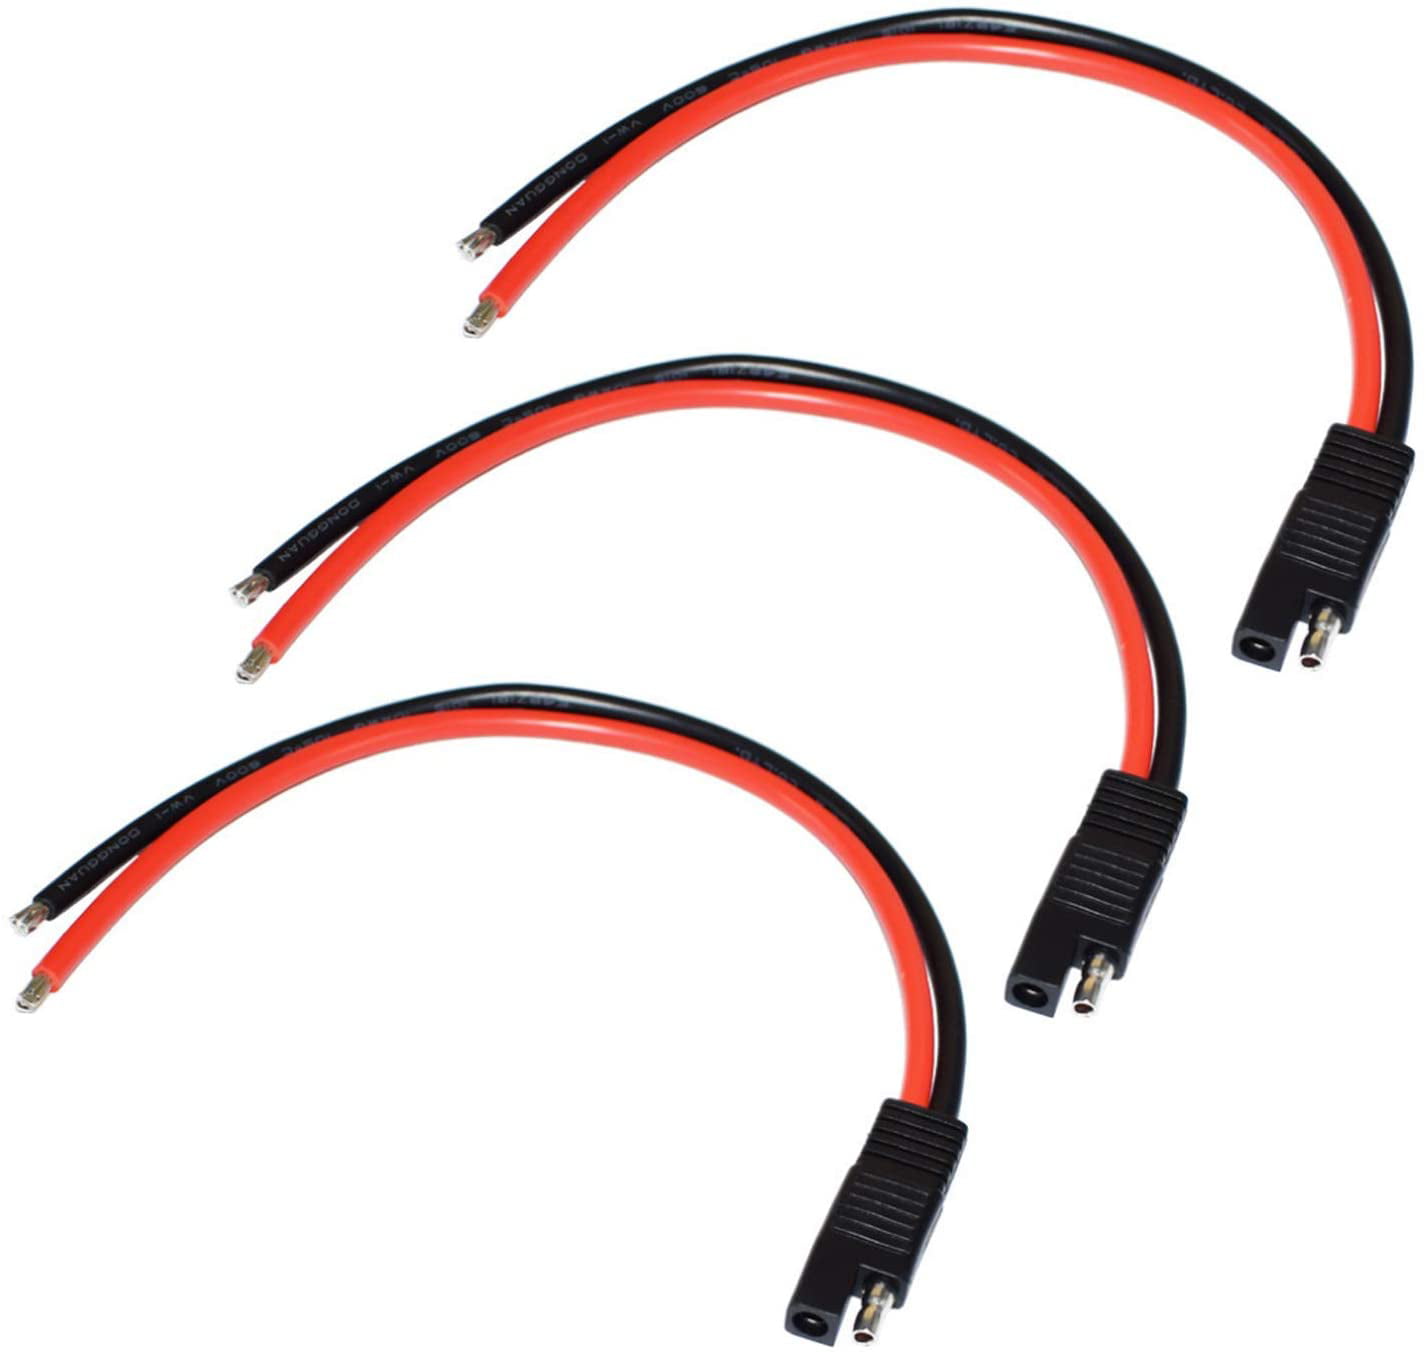 SAE Quick Connector Disconnect Plug SAE Automotive Extension Cable 3Pack Solar Panel SAE Plug- 30cm/1ft LIXINTIAN 14AWG SAE Connector Extension Cable, 